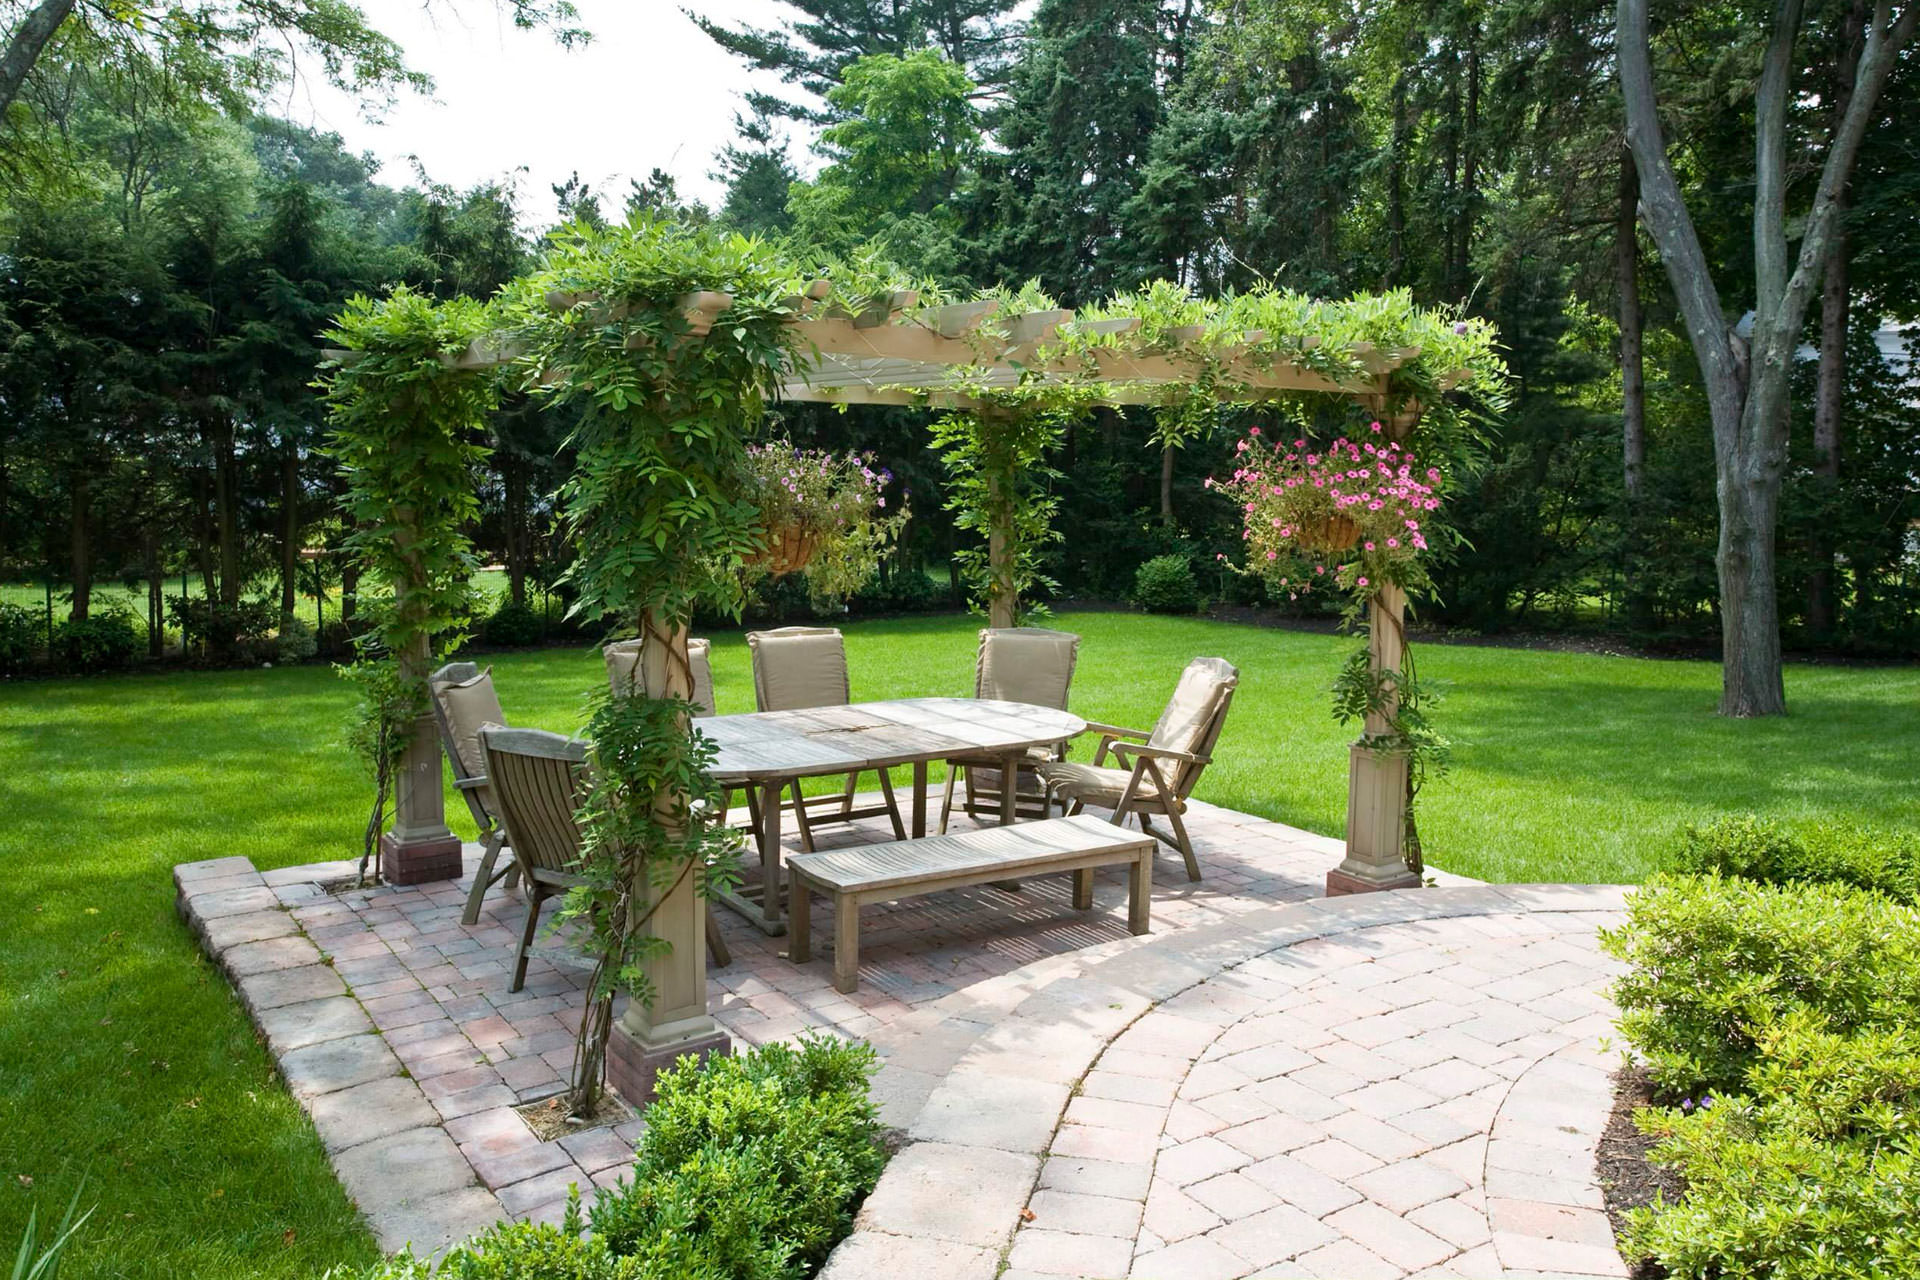 Pergola Plants Guide: Shade and Enhance Your Outdoor Space